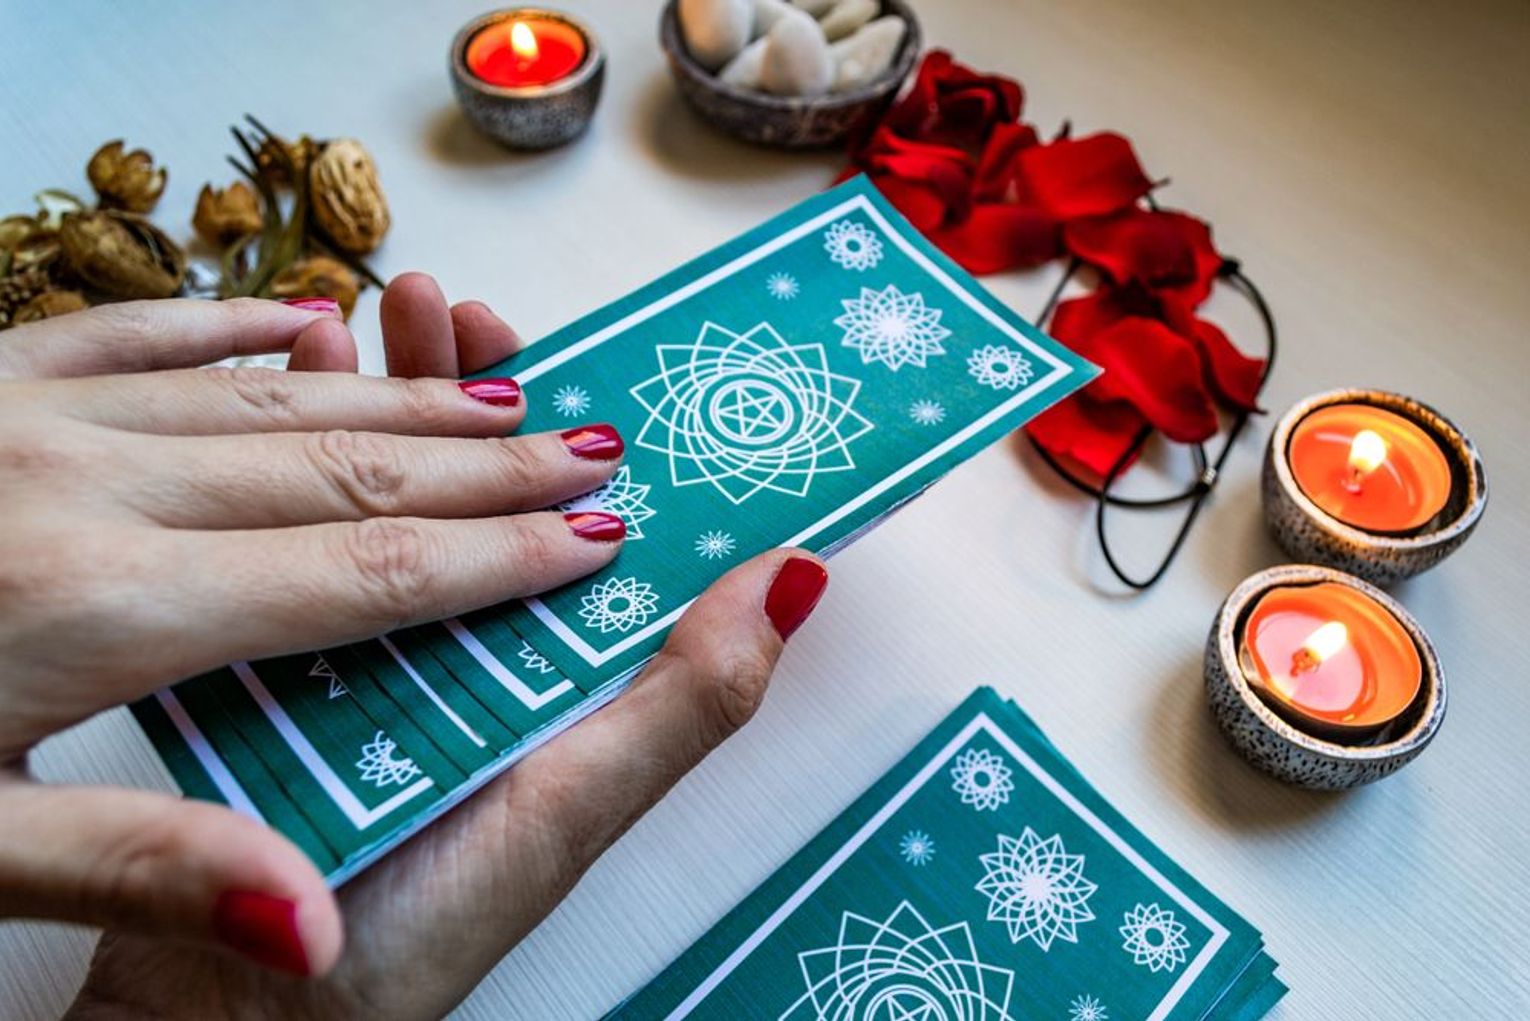 What is World Tarot Day?